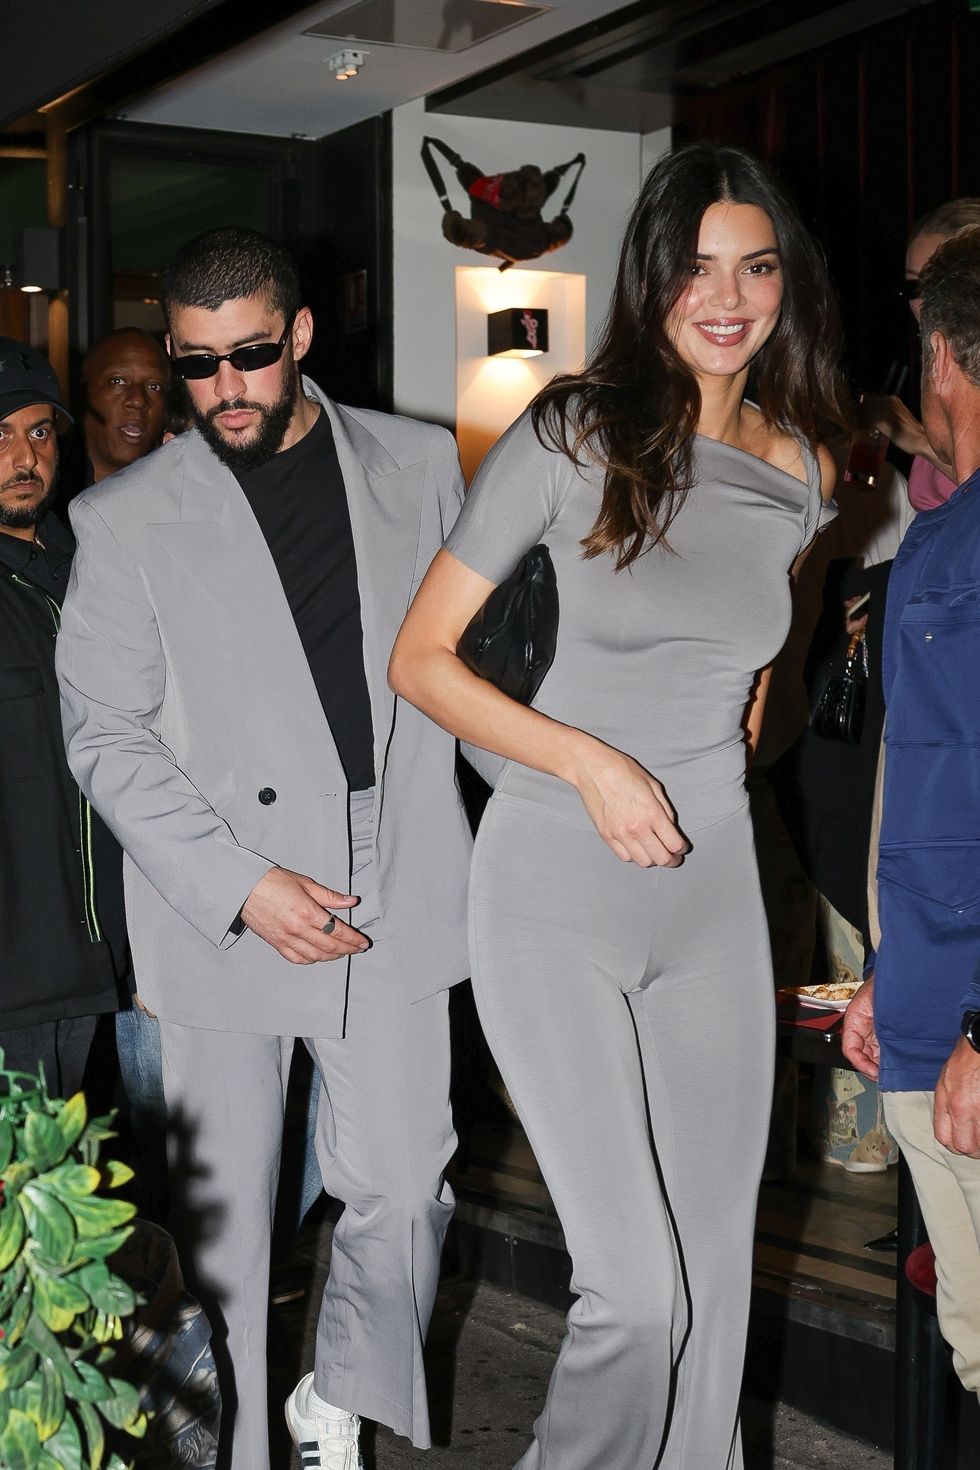 Kendall Jenner and Bad Bunny Step Out for Paris Dinner Date in Matching Gray Looks - Harper's BAZAAR